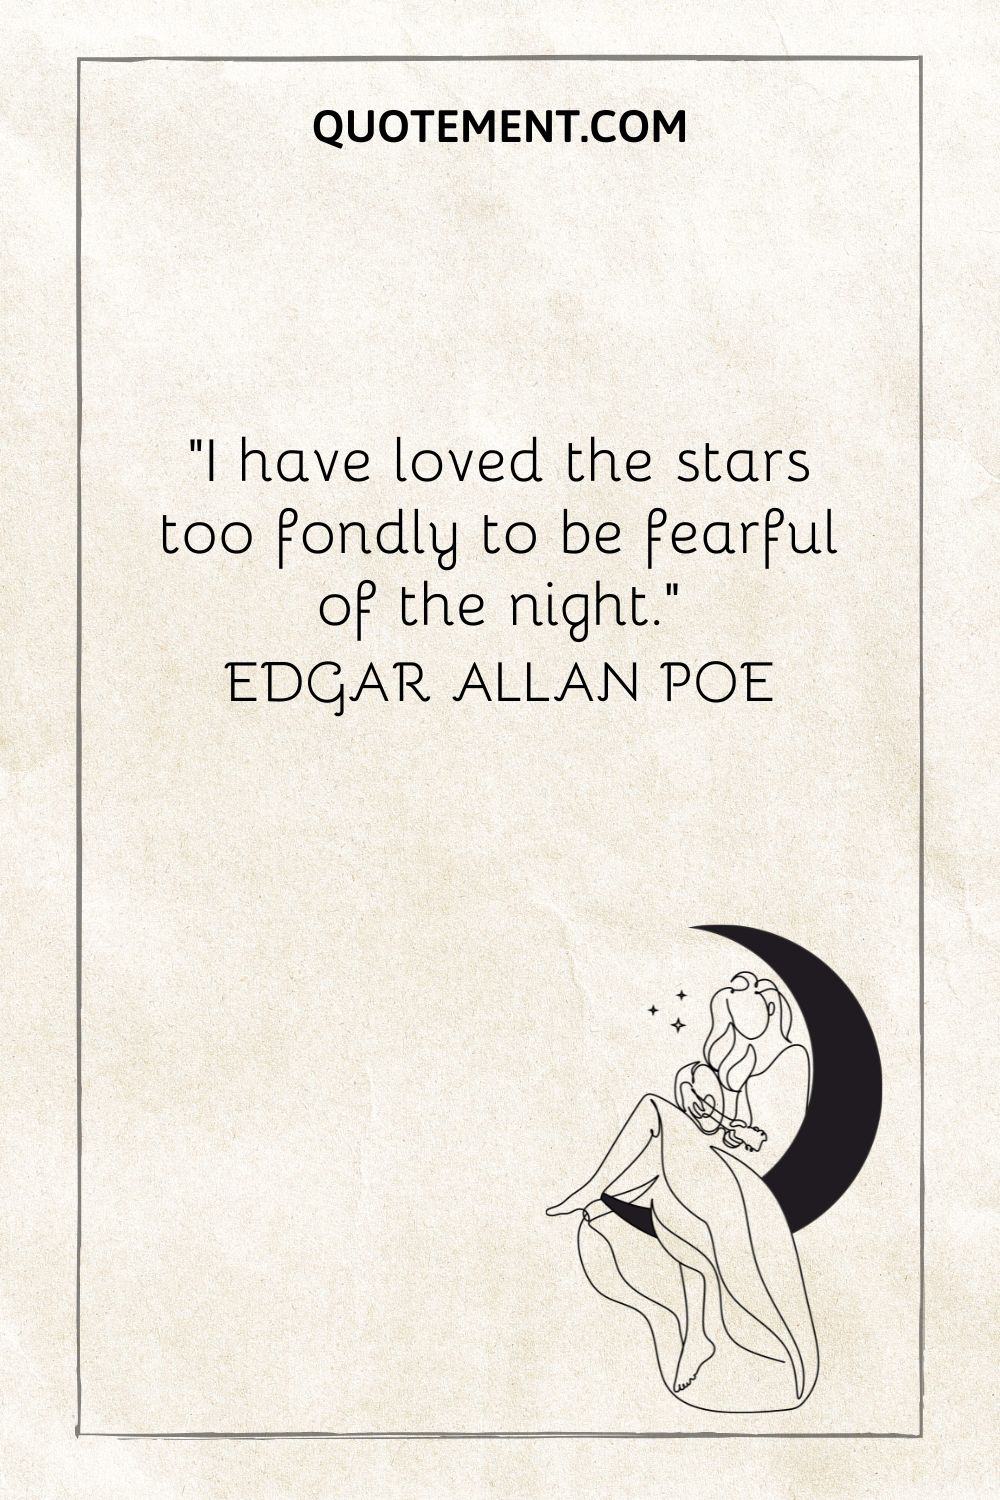 “I have loved the stars too fondly to be fearful of the night.” ― Edgar Allan Poe